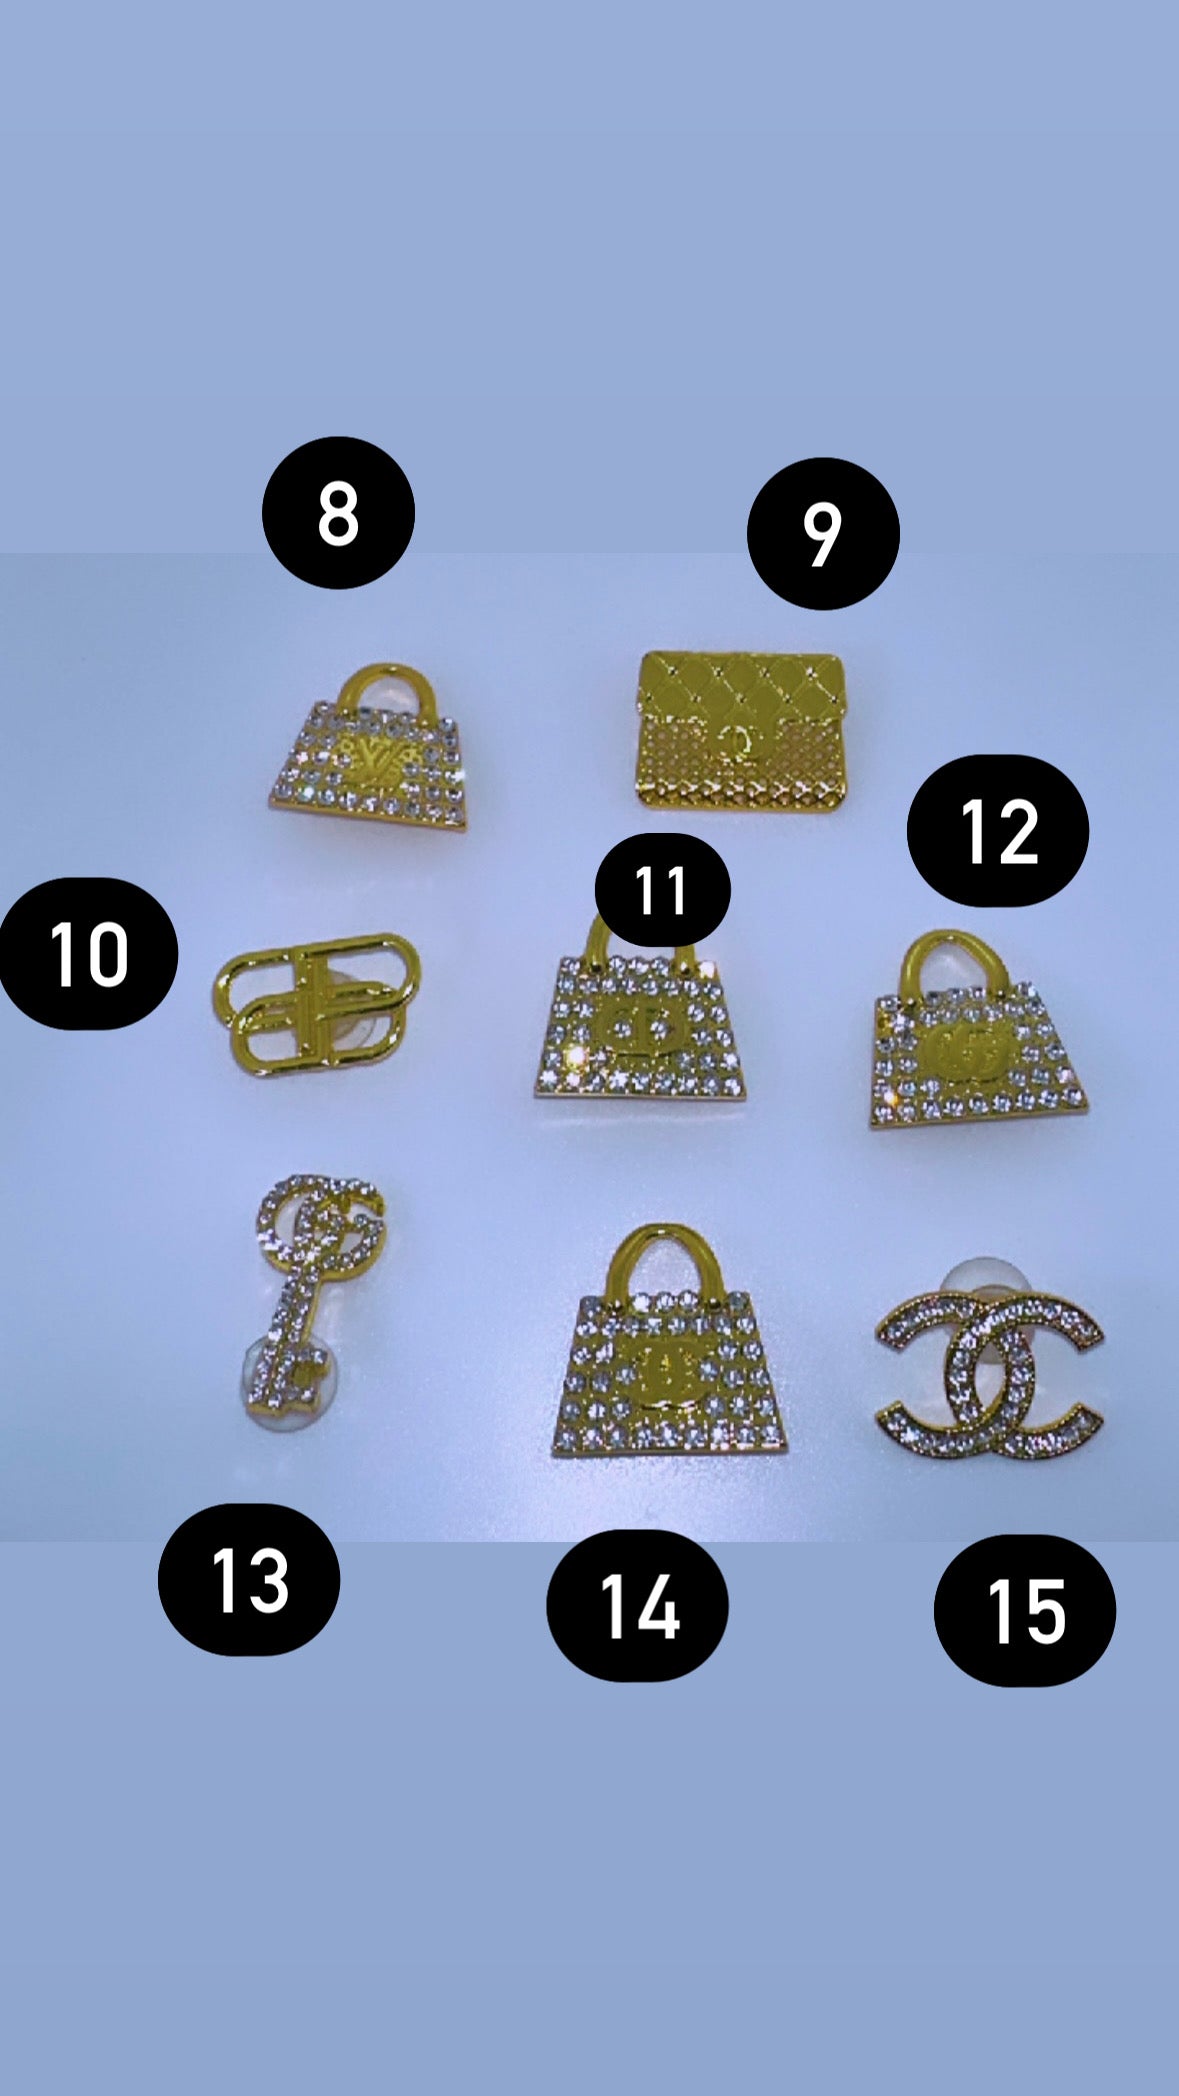 Chanel Croc Charms Bling -  Singapore